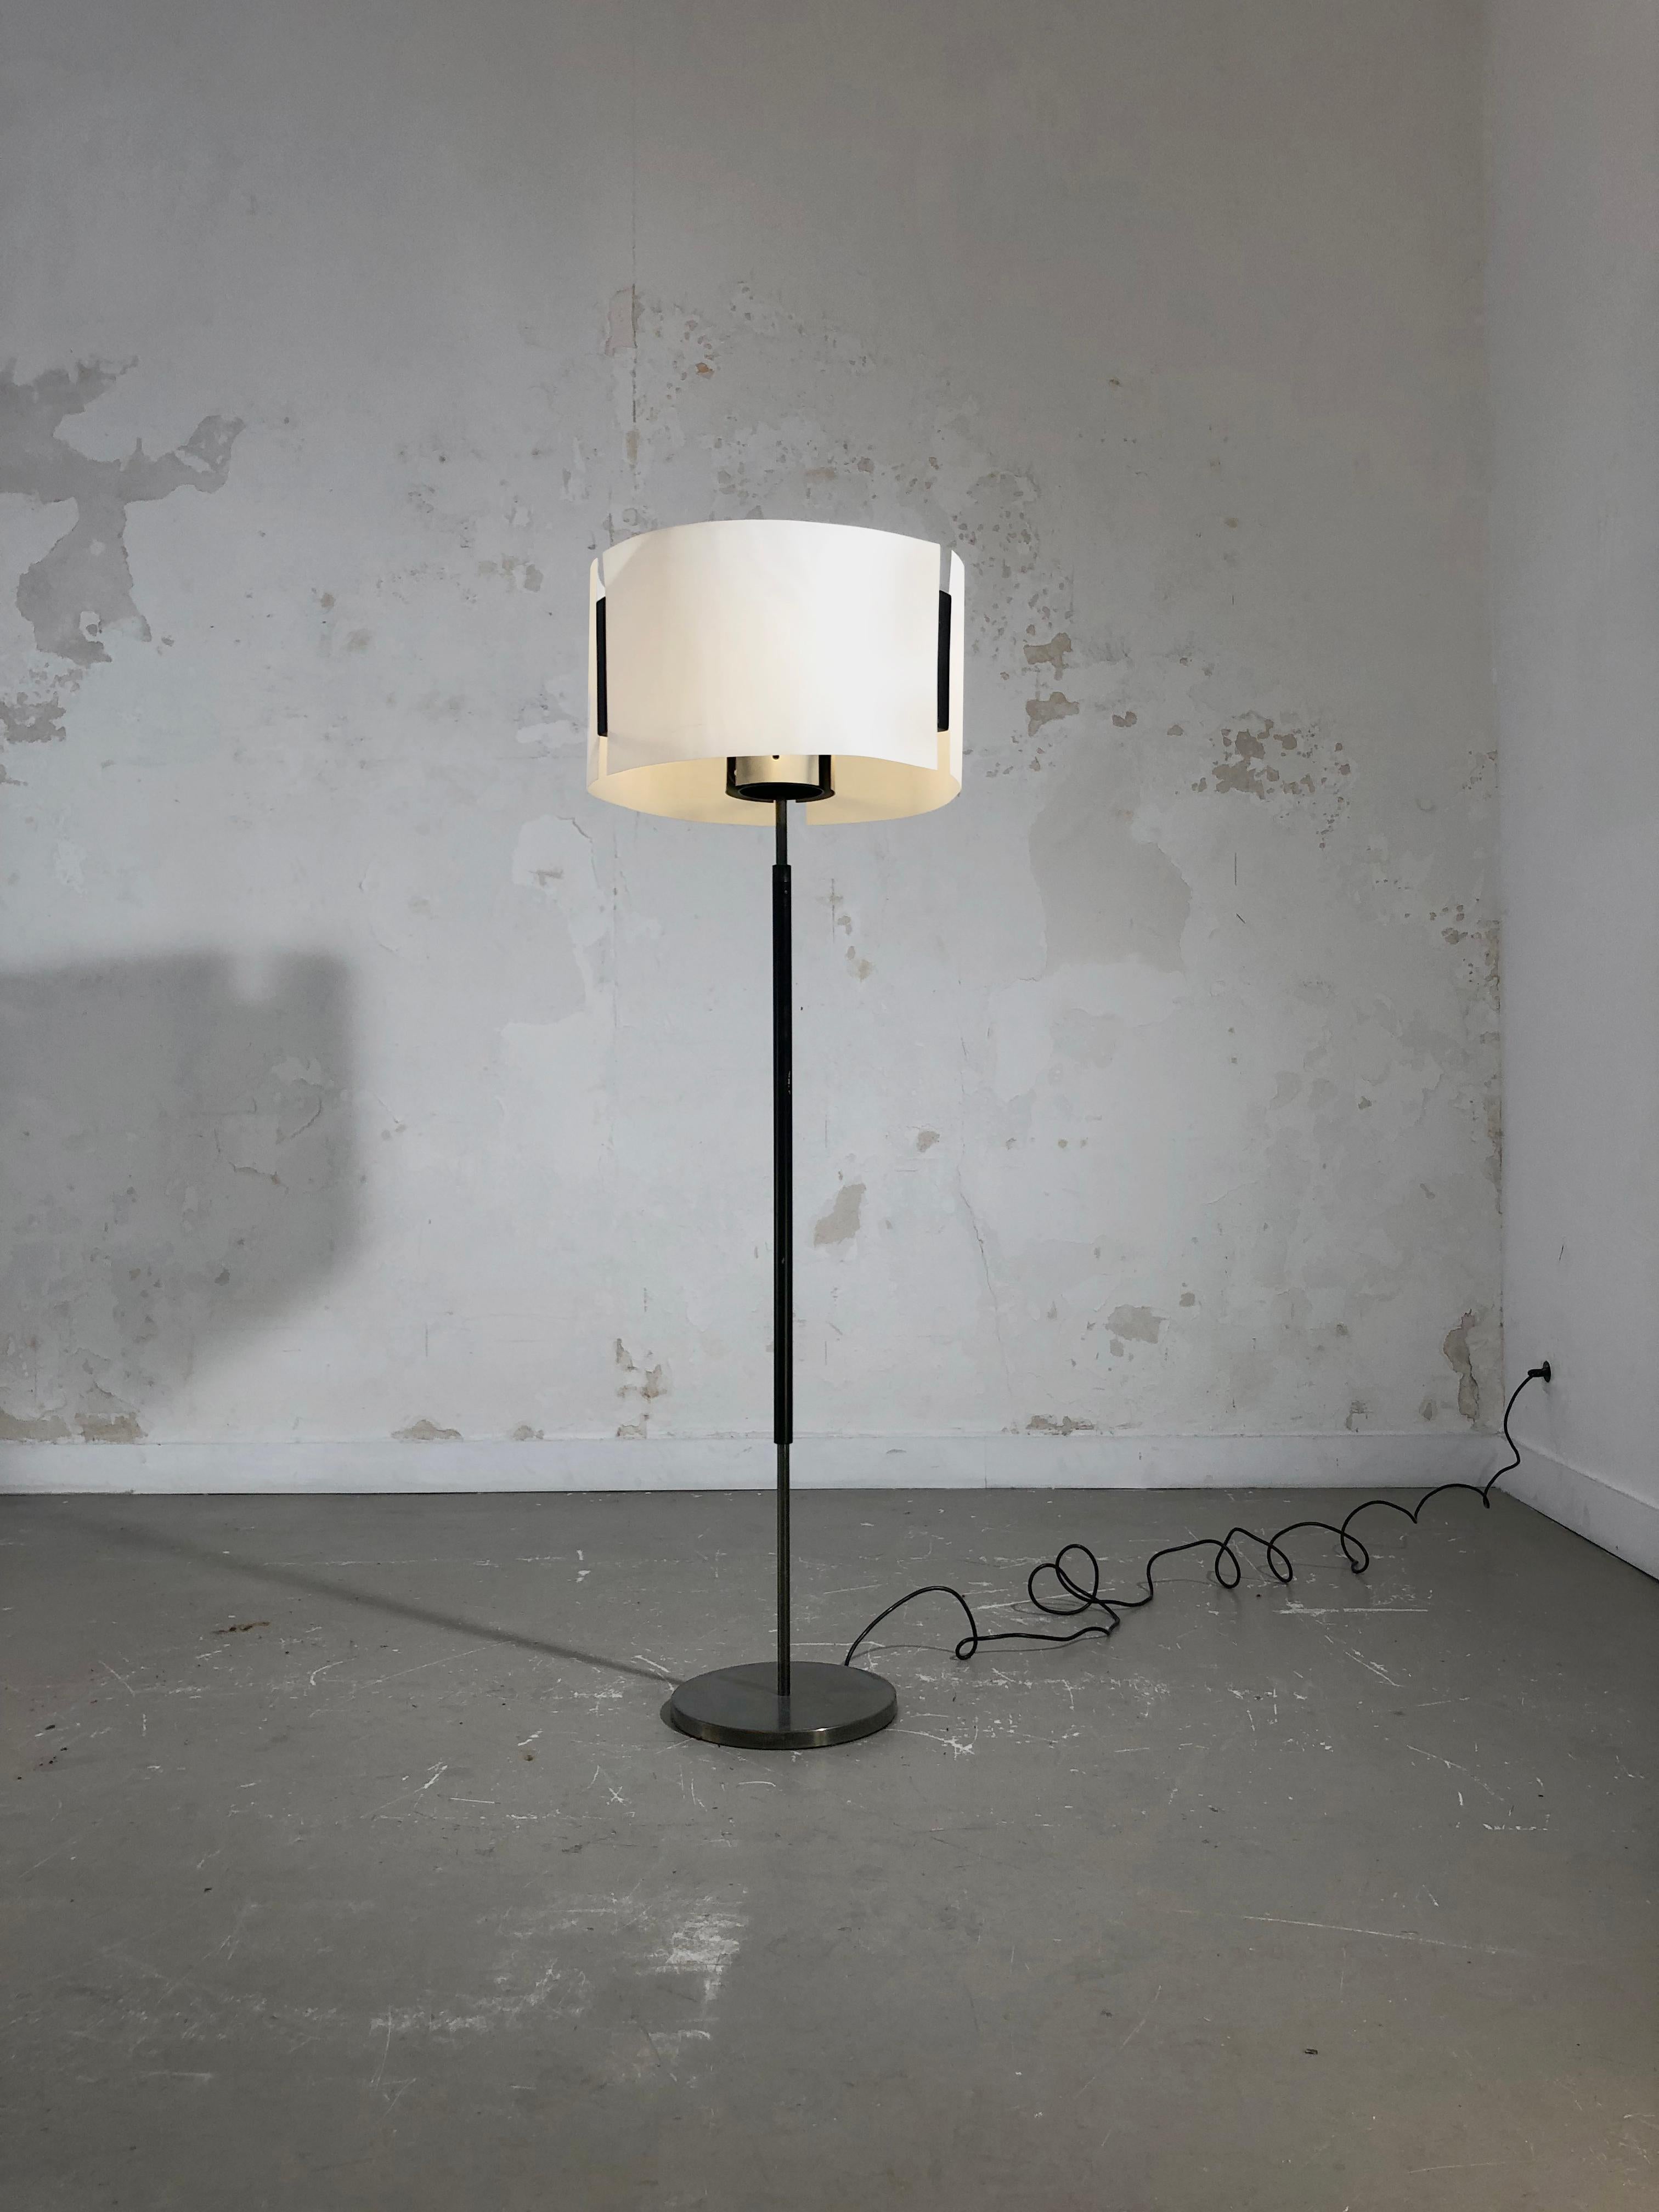 A MID-CENTURY-MODERN MODERNIST FLOOR LAMP by OSTUNI & FORTI, O-LUCE, Italy, 1960 For Sale 5